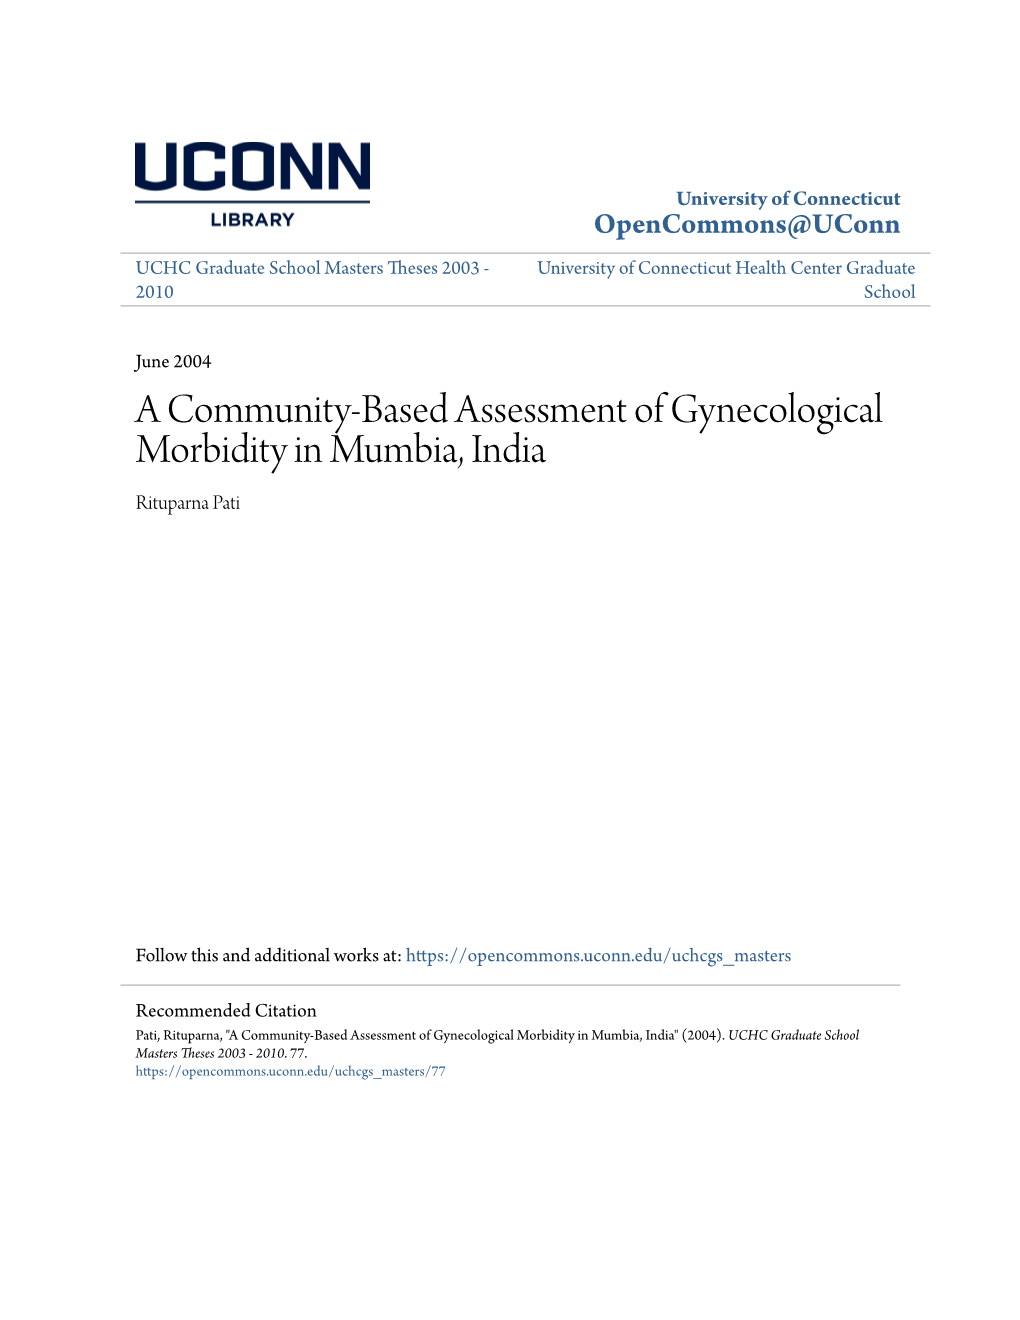 A Community-Based Assessment of Gynecological Morbidity in Mumbia, India Rituparna Pati